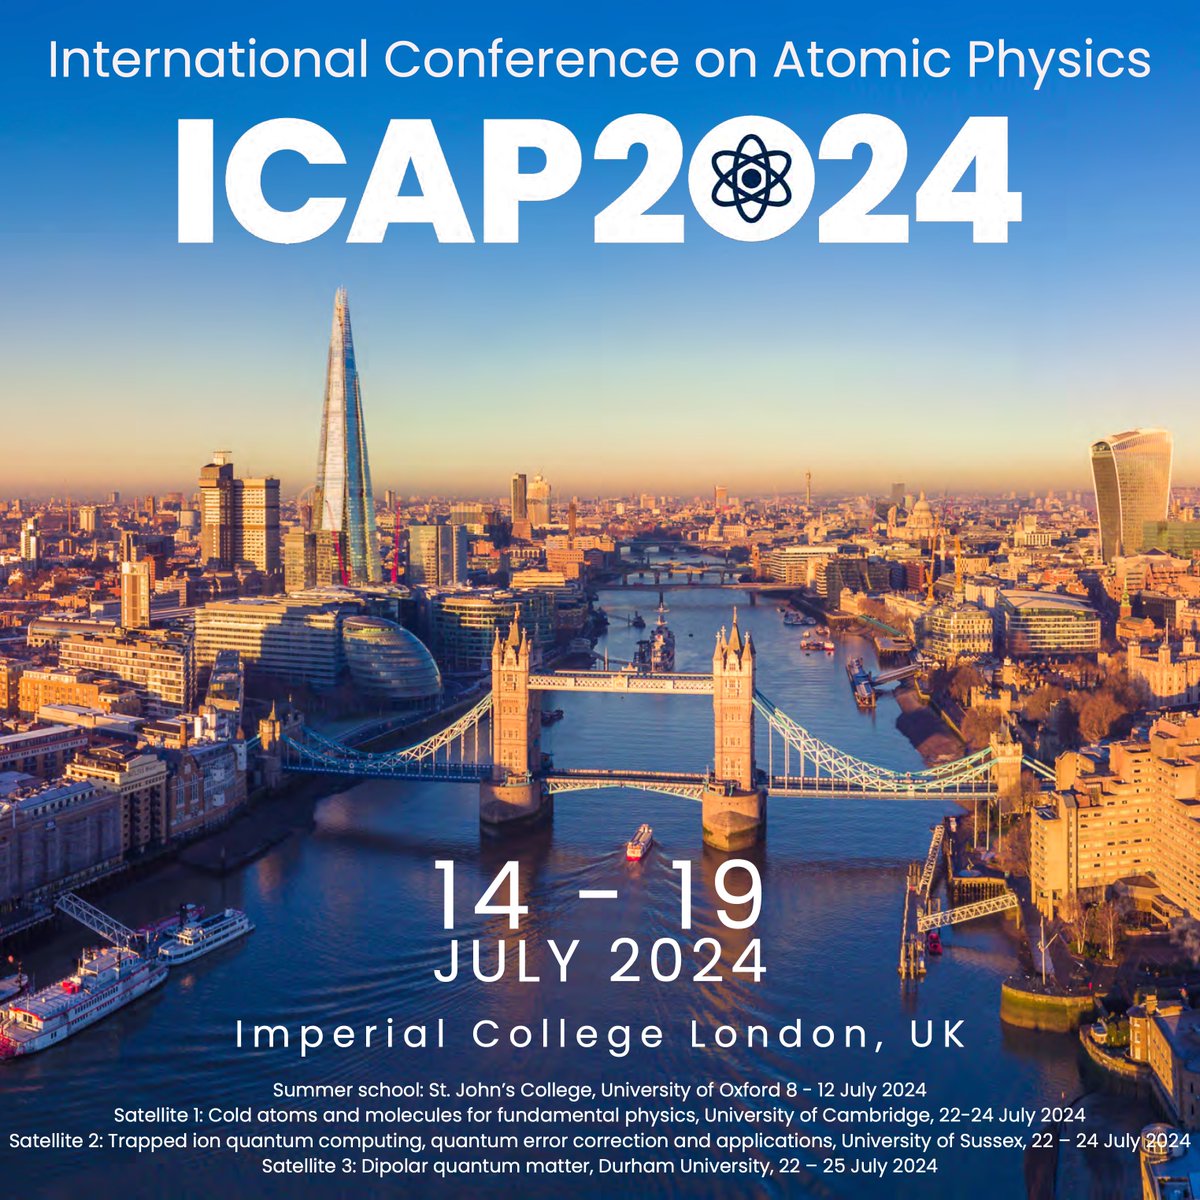 Save the dates! The 28th International Conference on Atomic Physics will be held at Imperial College London, 14-19 July 2024⚛️ Summer school: 8-12 July (Oxford) Satellite meetings: 22-24 July (Cambridge, Sussex), 22-25 July (Durham)